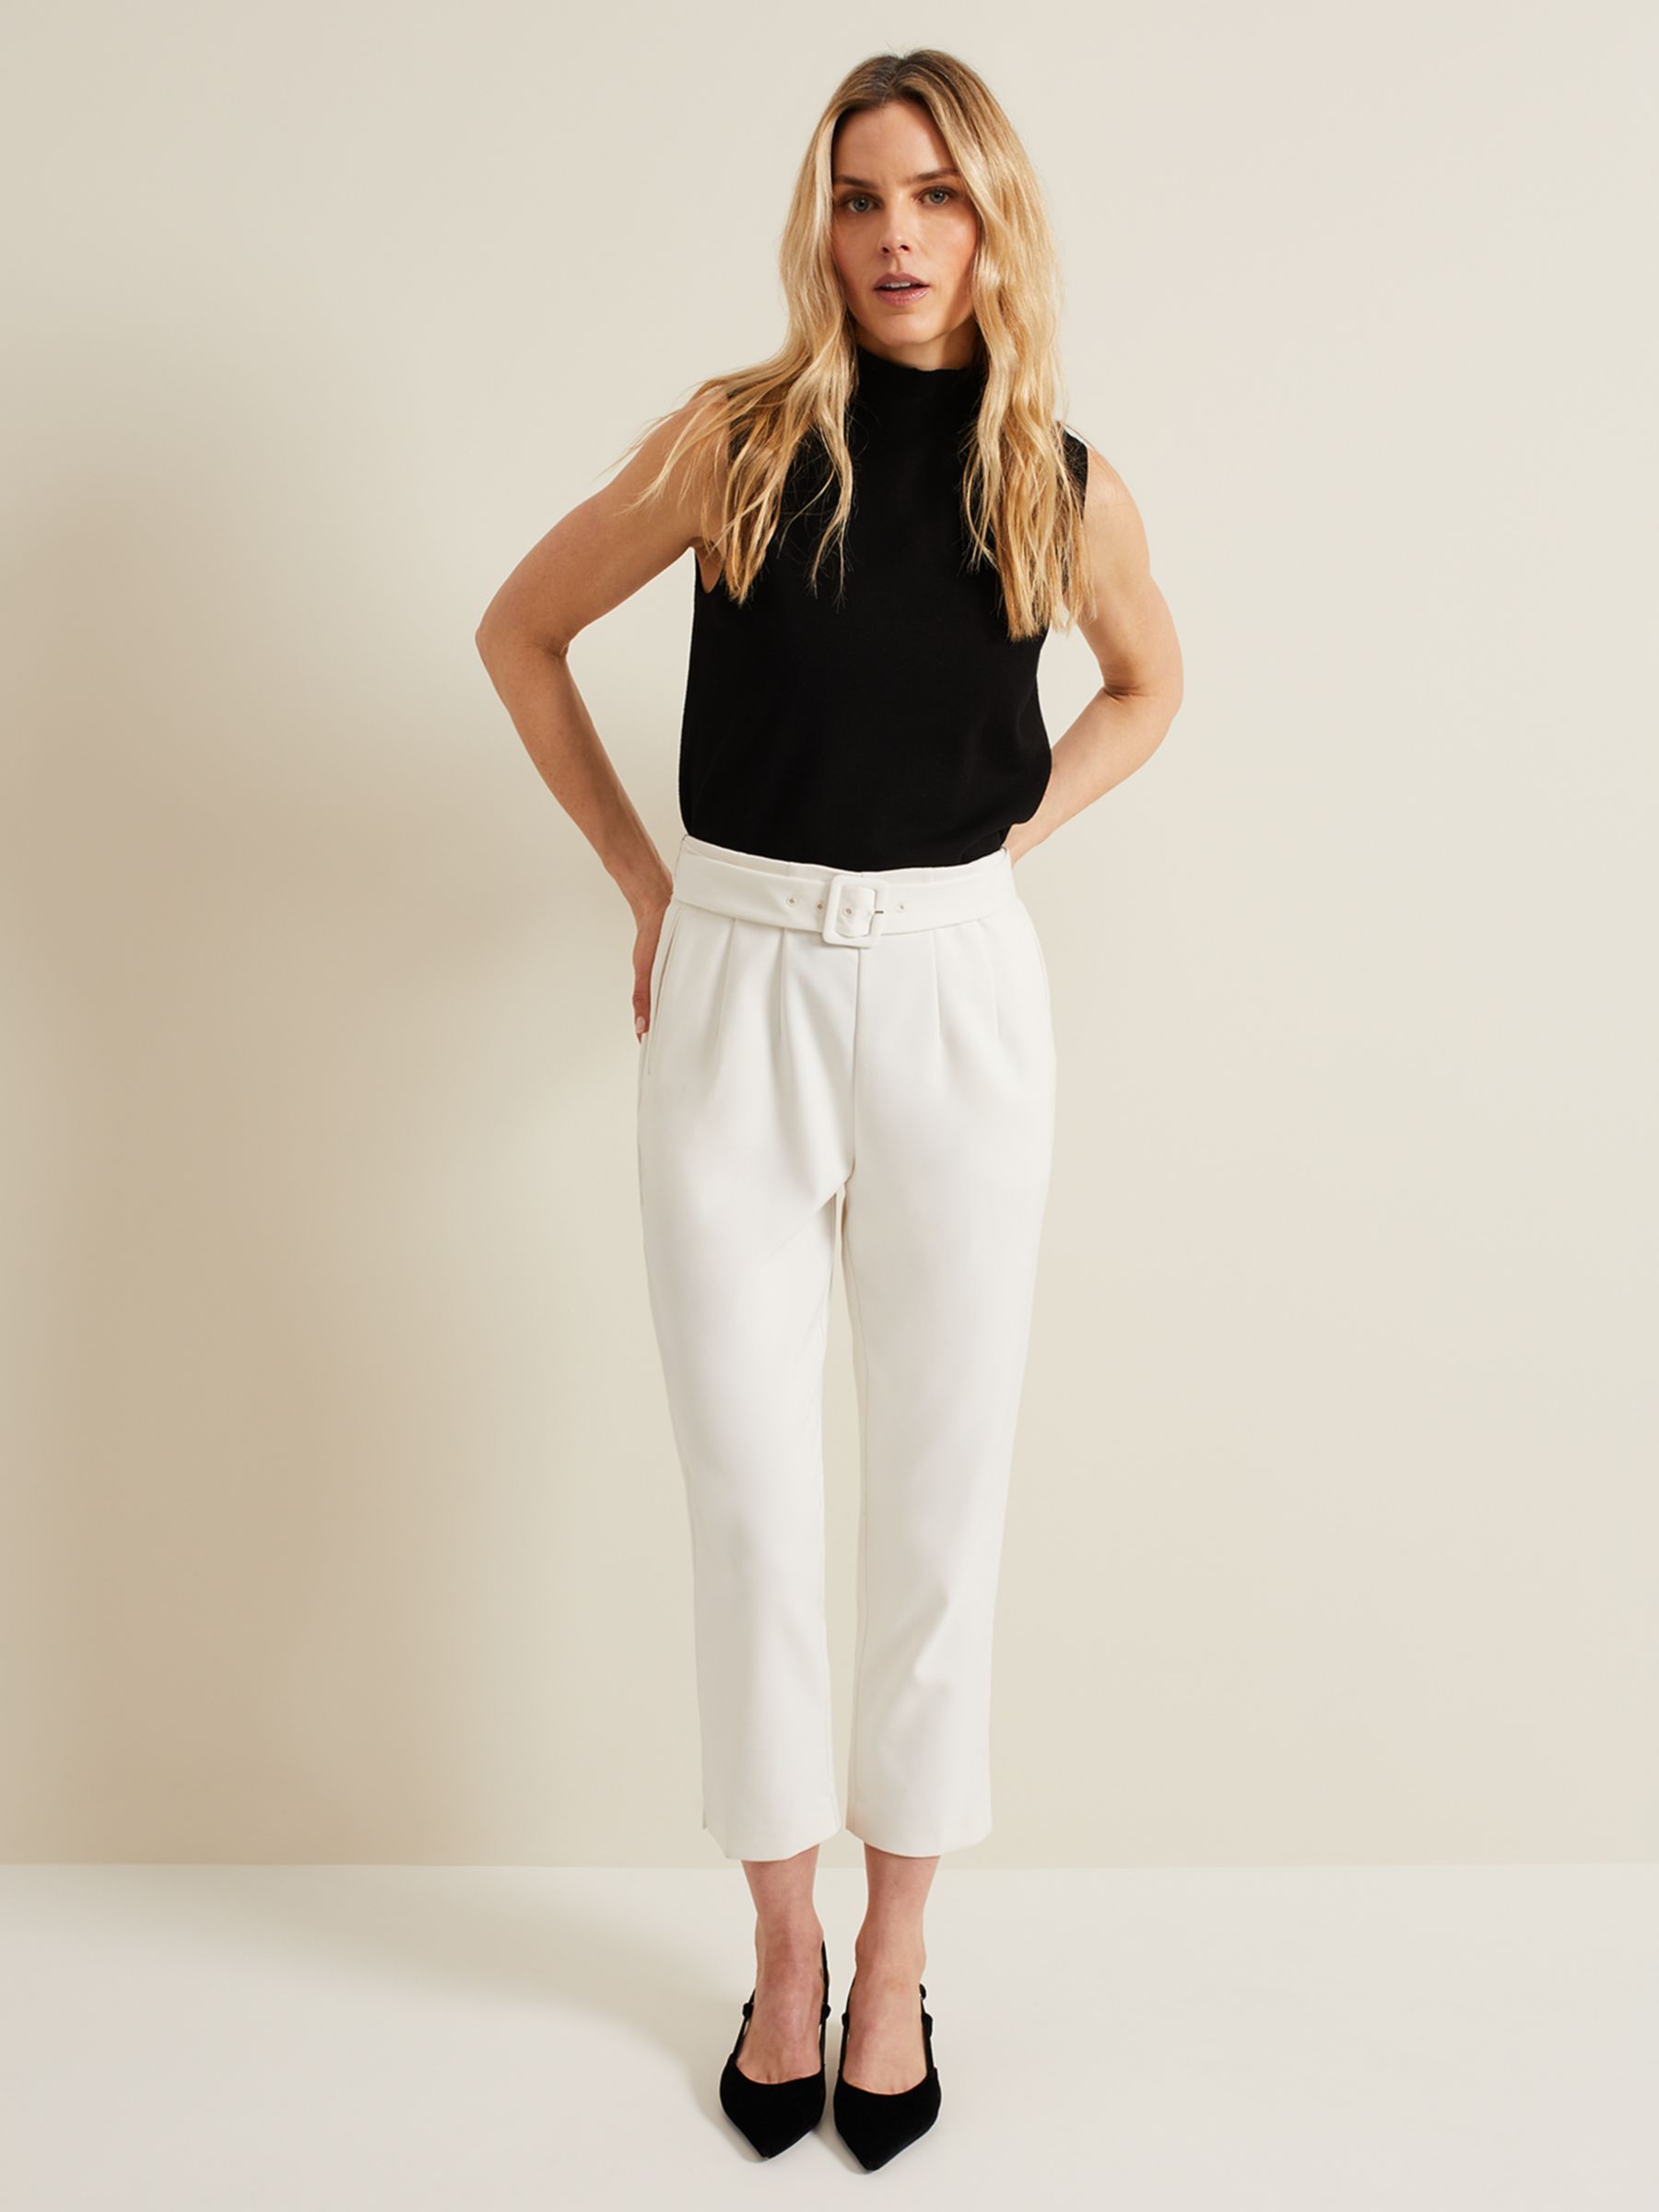 Buy Phase Eight Gaia Tailored Cropped Trousers, Ivory Online at johnlewis.com